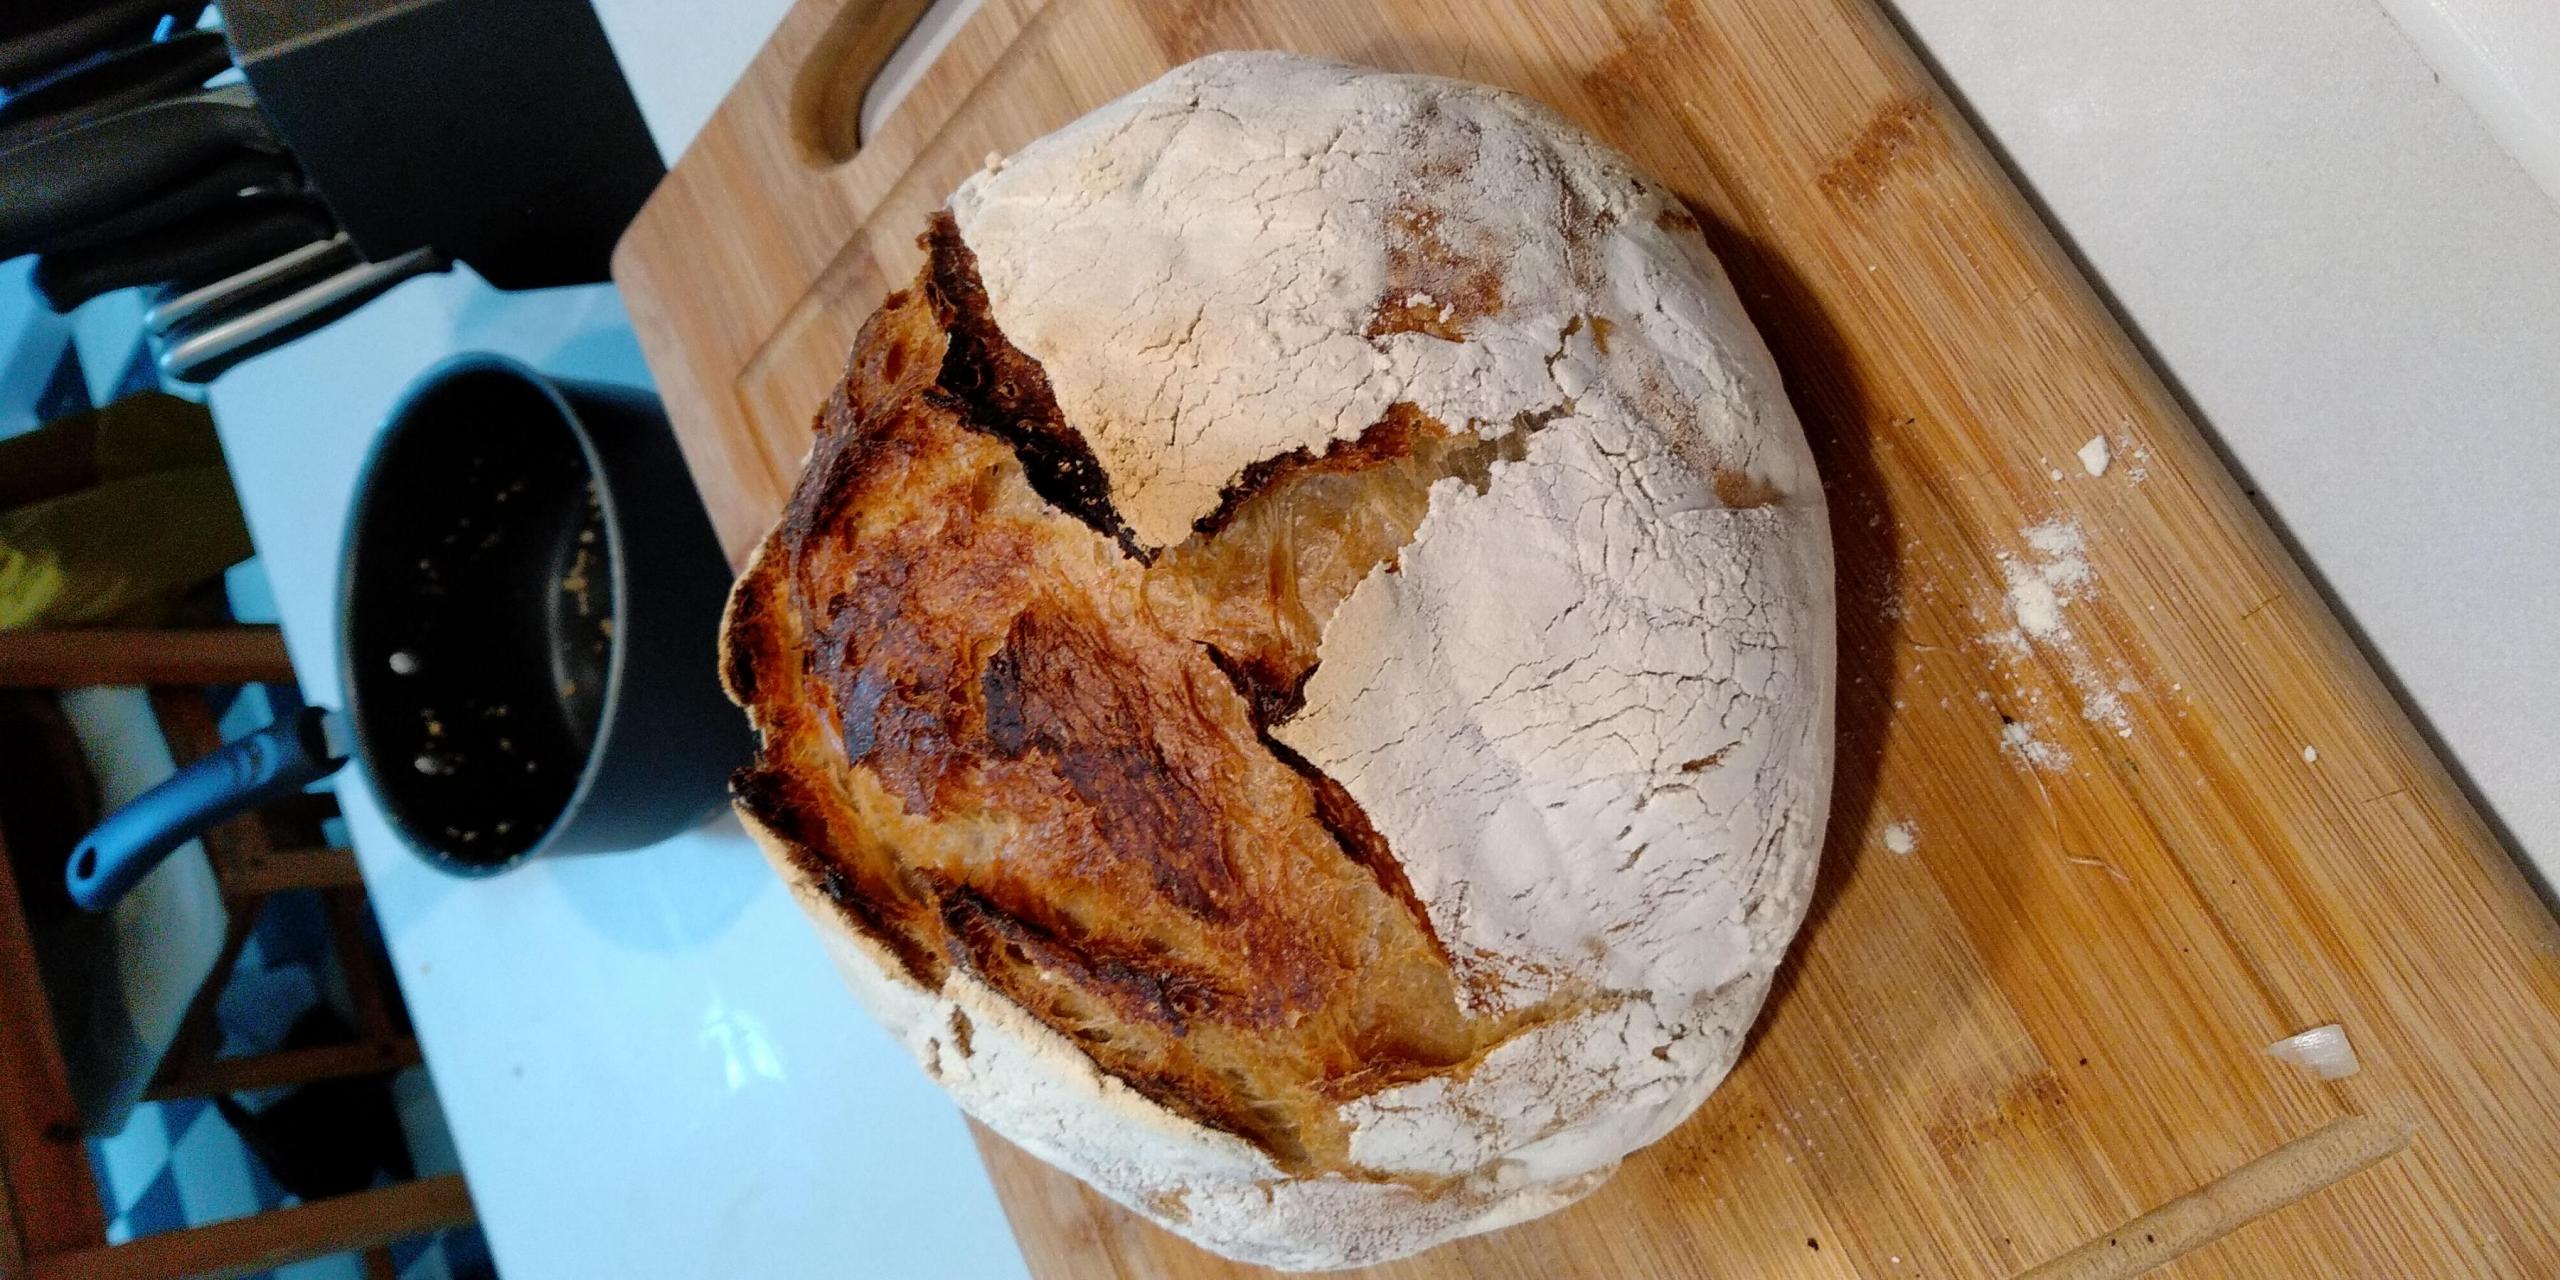 Another great albeit slightly too floury boule